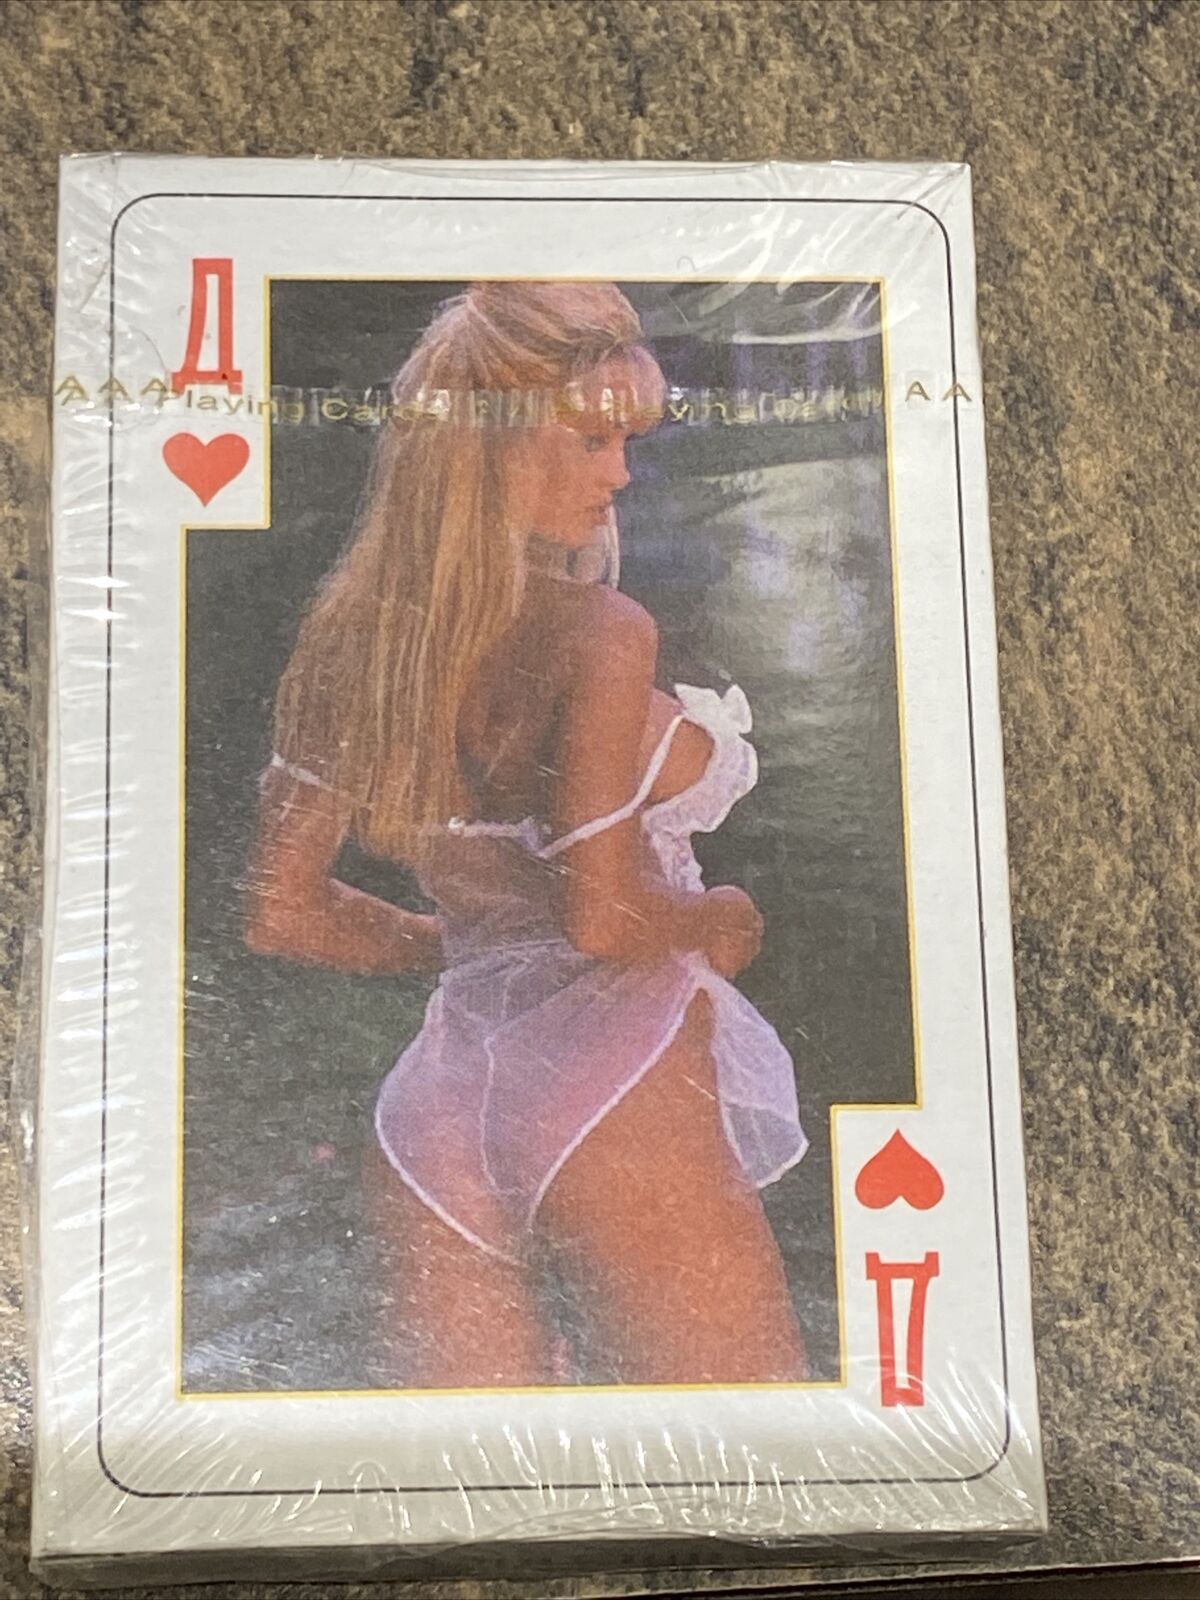 Set of adult themed Russian playing cards nude ladies lingerie swimwear